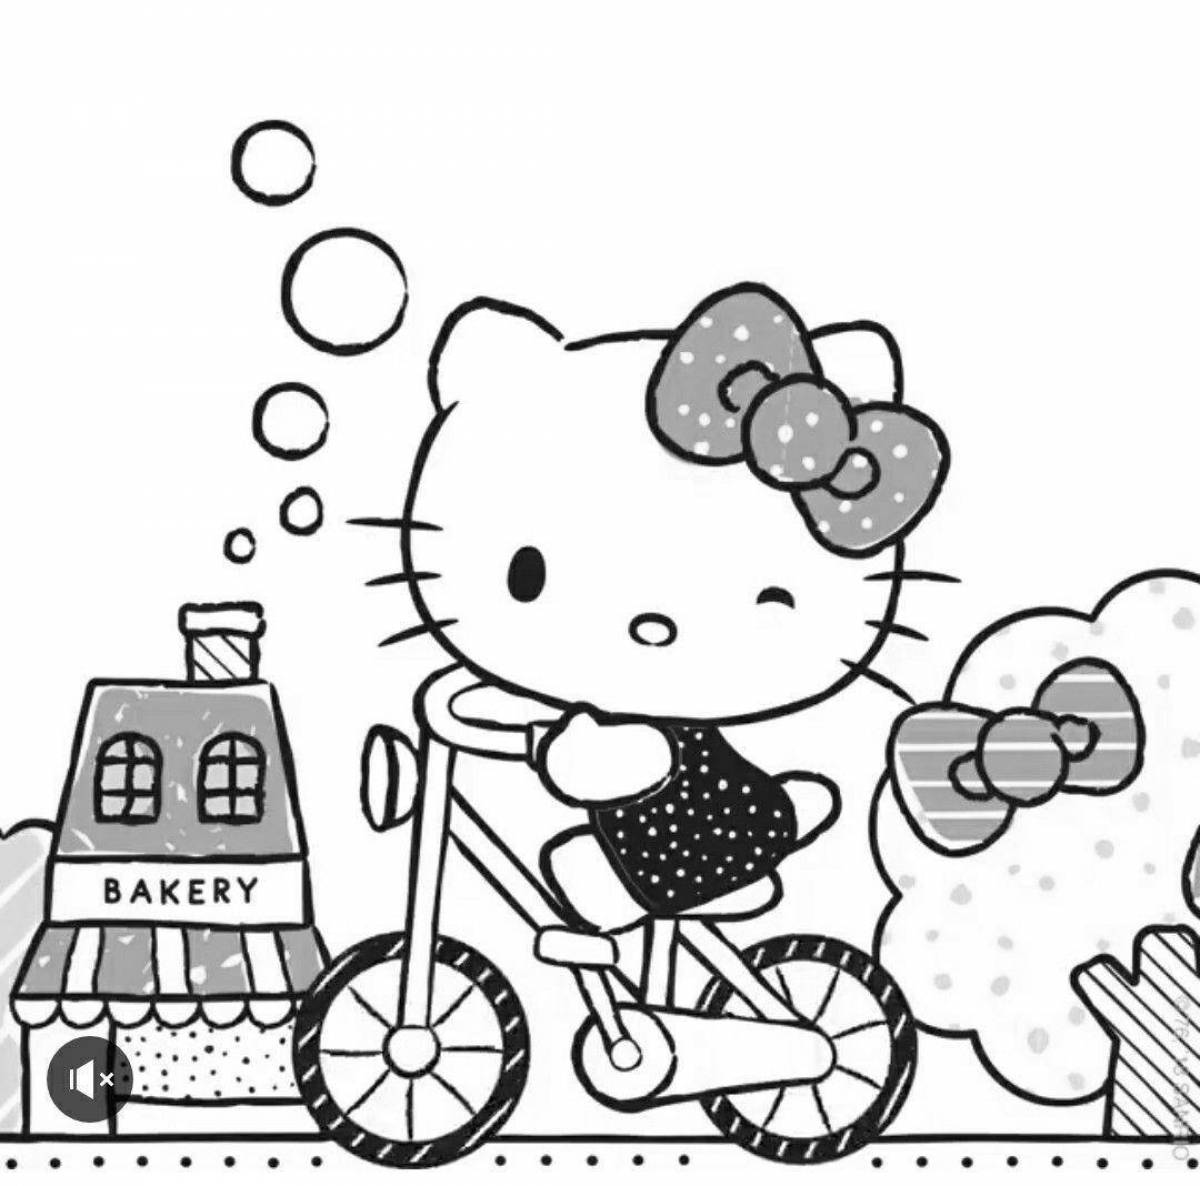 Fabulous melody and hello kitty coloring book